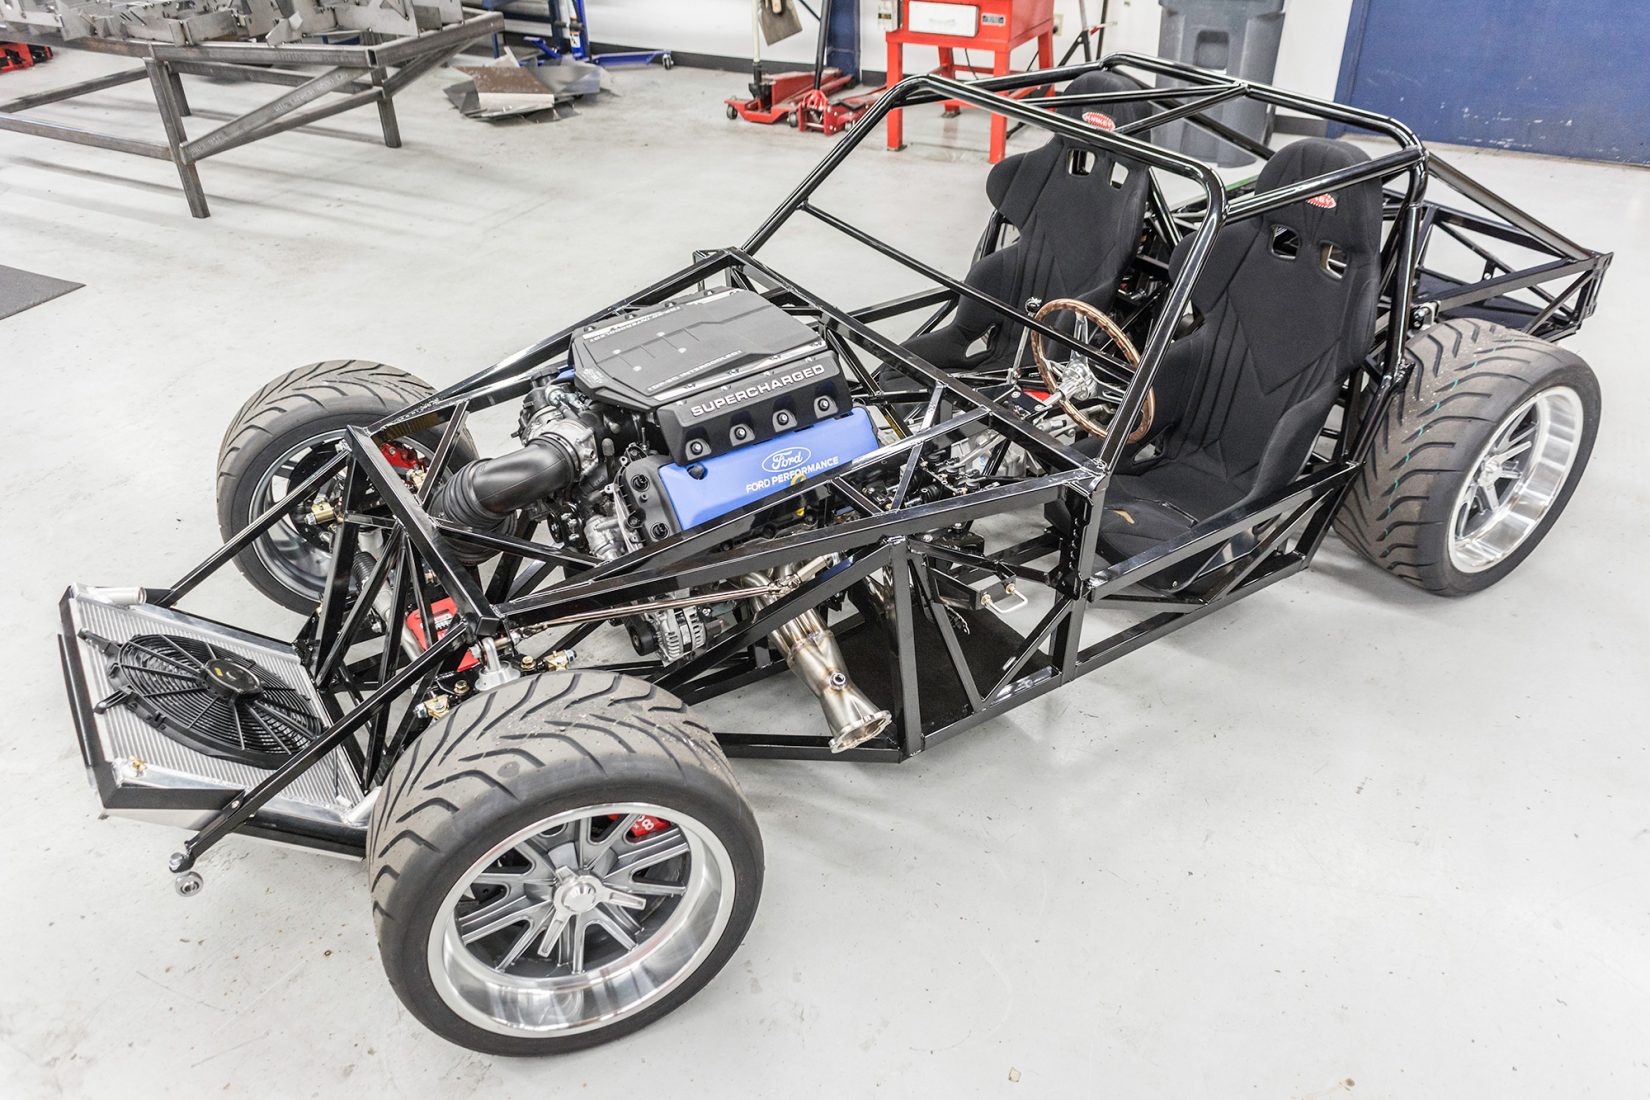 The new chassis was tested and delivers 7.5 times more torsional rigidity than the Gen 1 and Gen 2 cars! Thanks to the muscle in modern CAD and our 20 years+ of chassis engineering, the new Factory Five Gen 3 Coupe chassis is the most rigid FFR frame to date. Even stronger than the mighty GTM! This is a huge deal since a strong chassis delivers the best ride quality and the highest performance on the track.